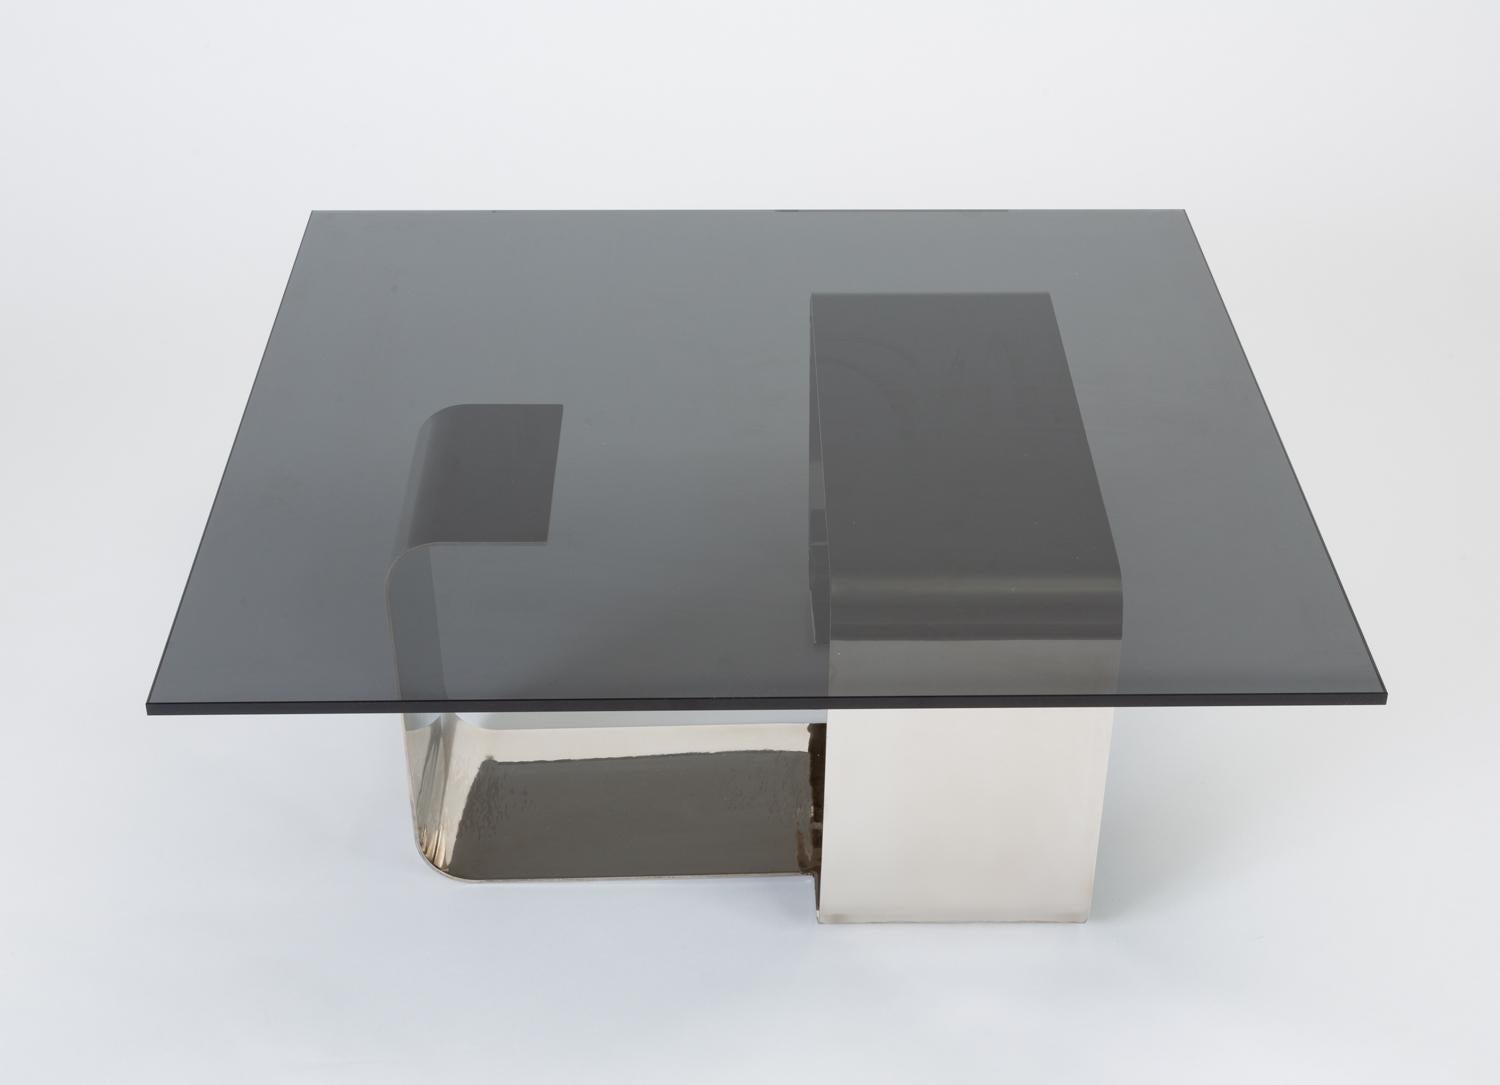 Late 20th Century Polished Steel and Smoked Glass Coffee Table by François Monnet for Kappa